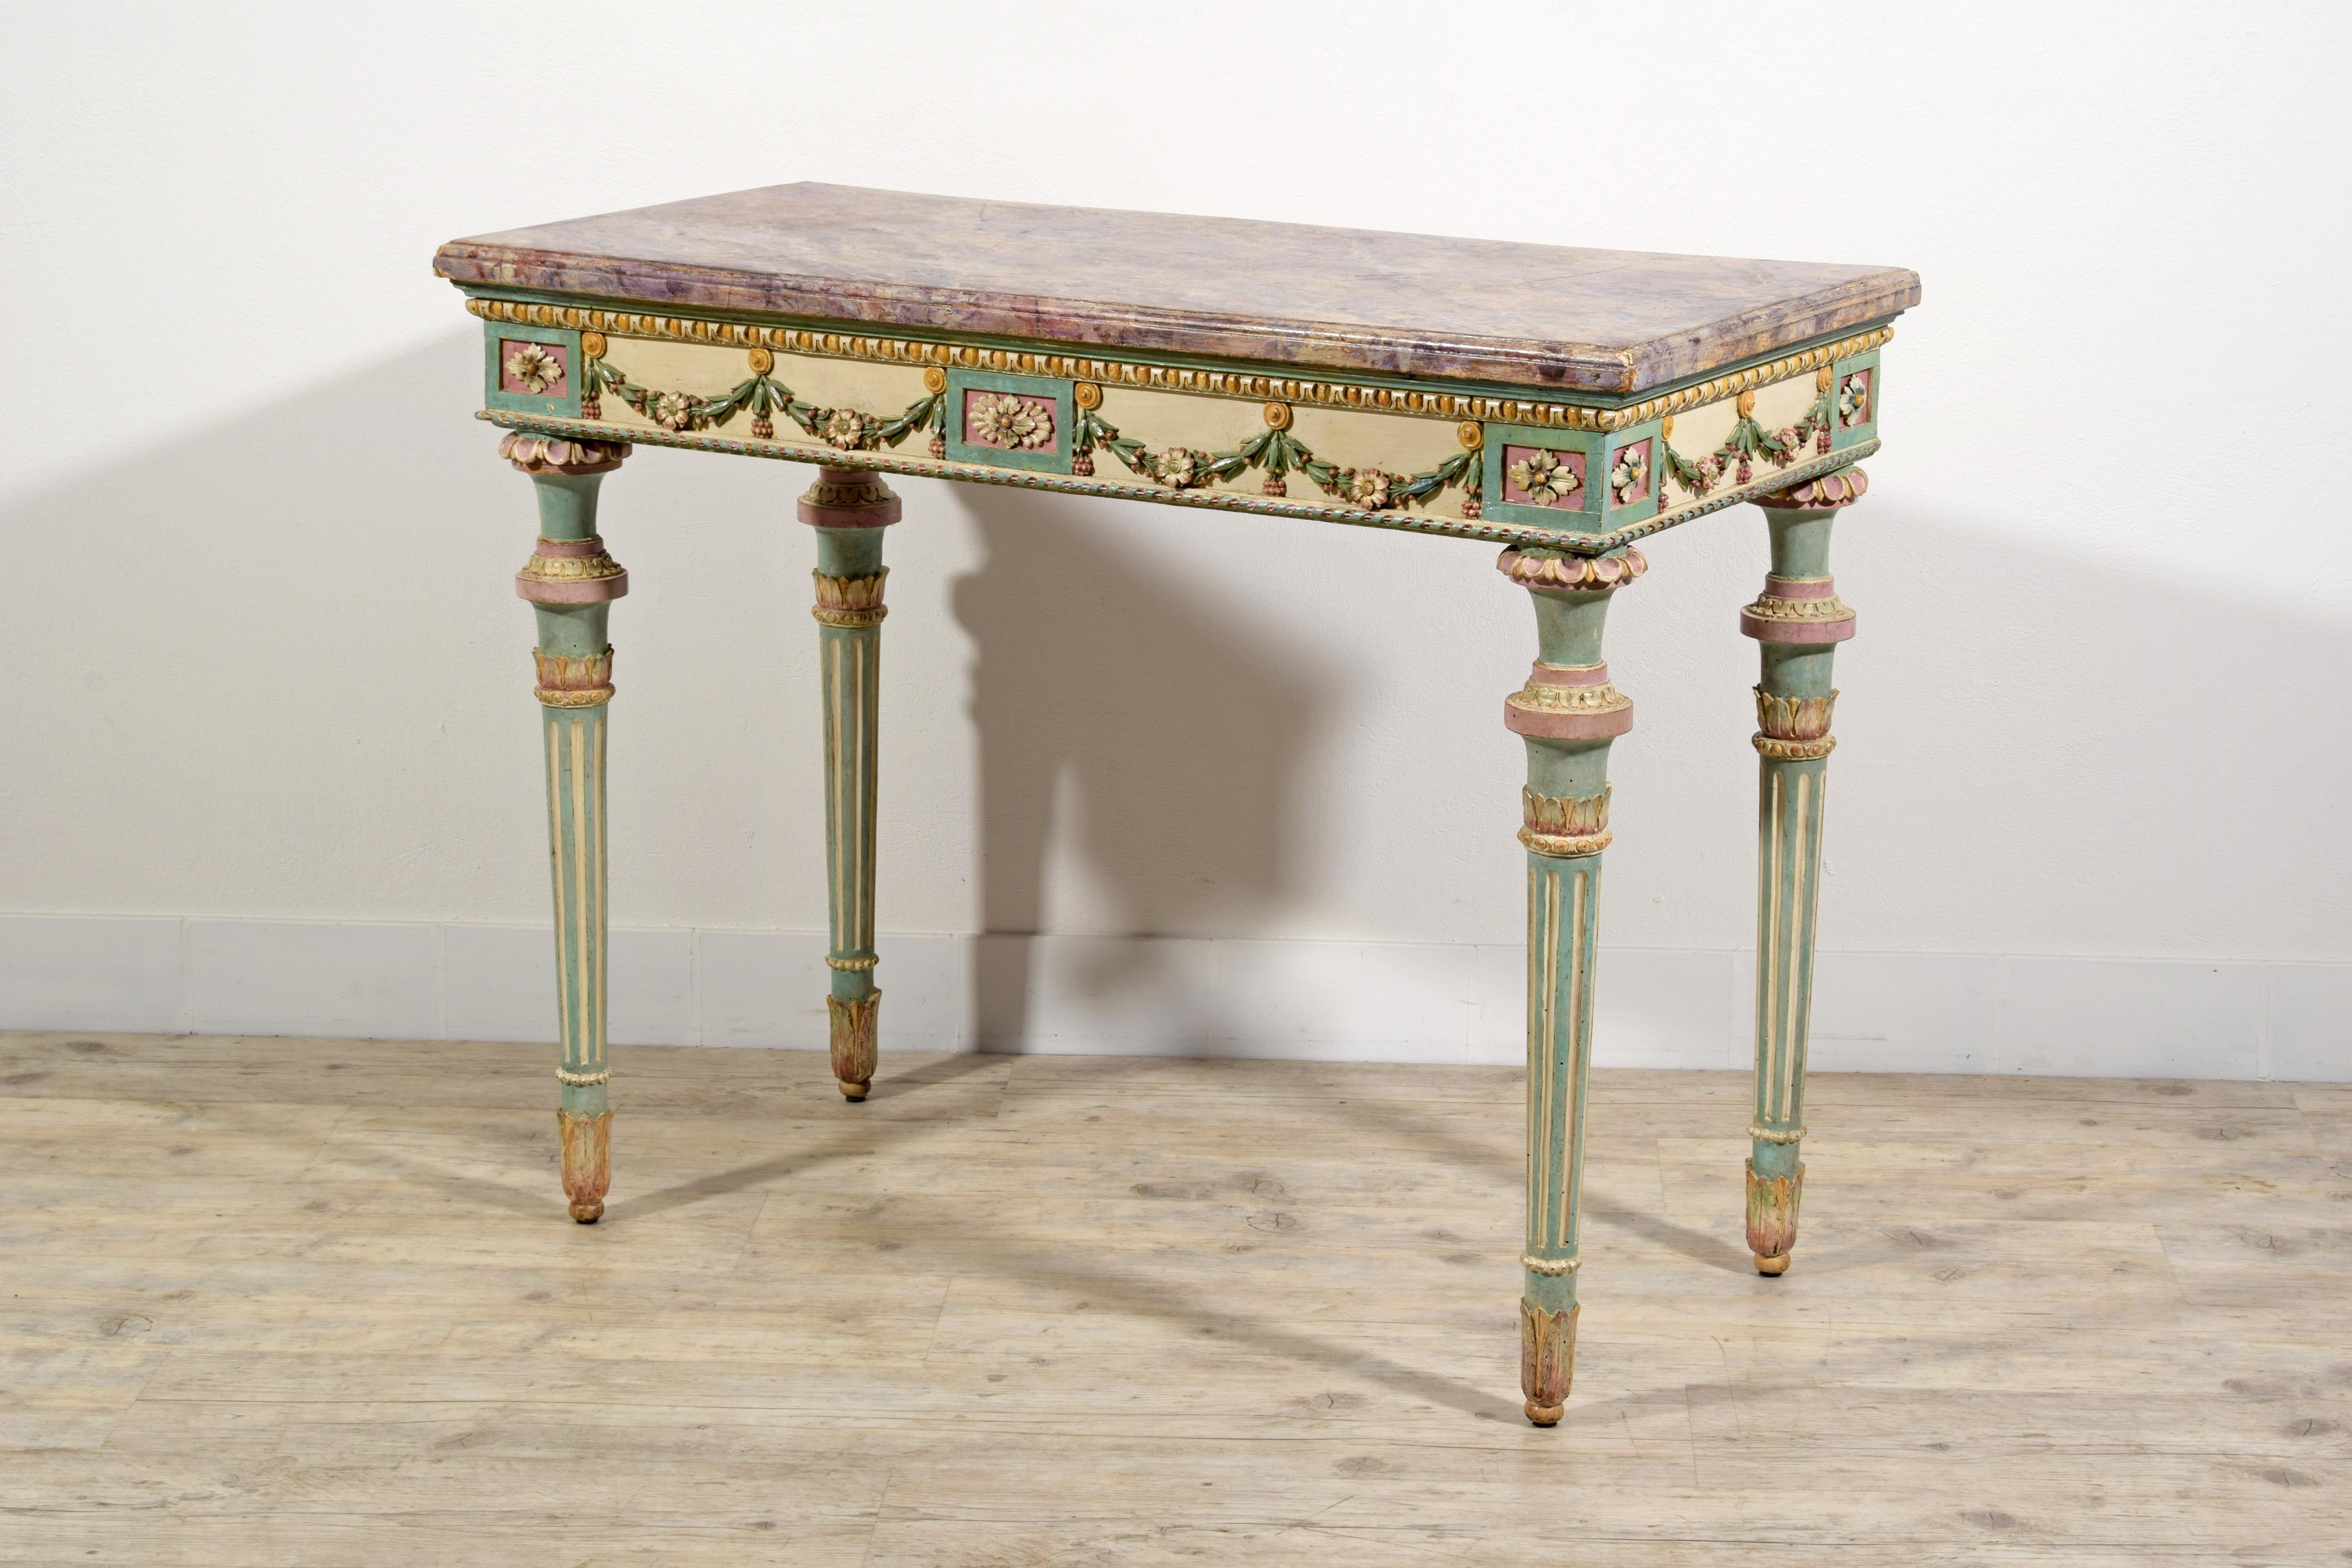 Late 18th Century, Italian Neoclassical Lacquered Wood Console

This elegant console was made in the neoclassical era, in the second half of the eighteenth century in Milan, Italy. The structure is in finely carved wood and lacquered in